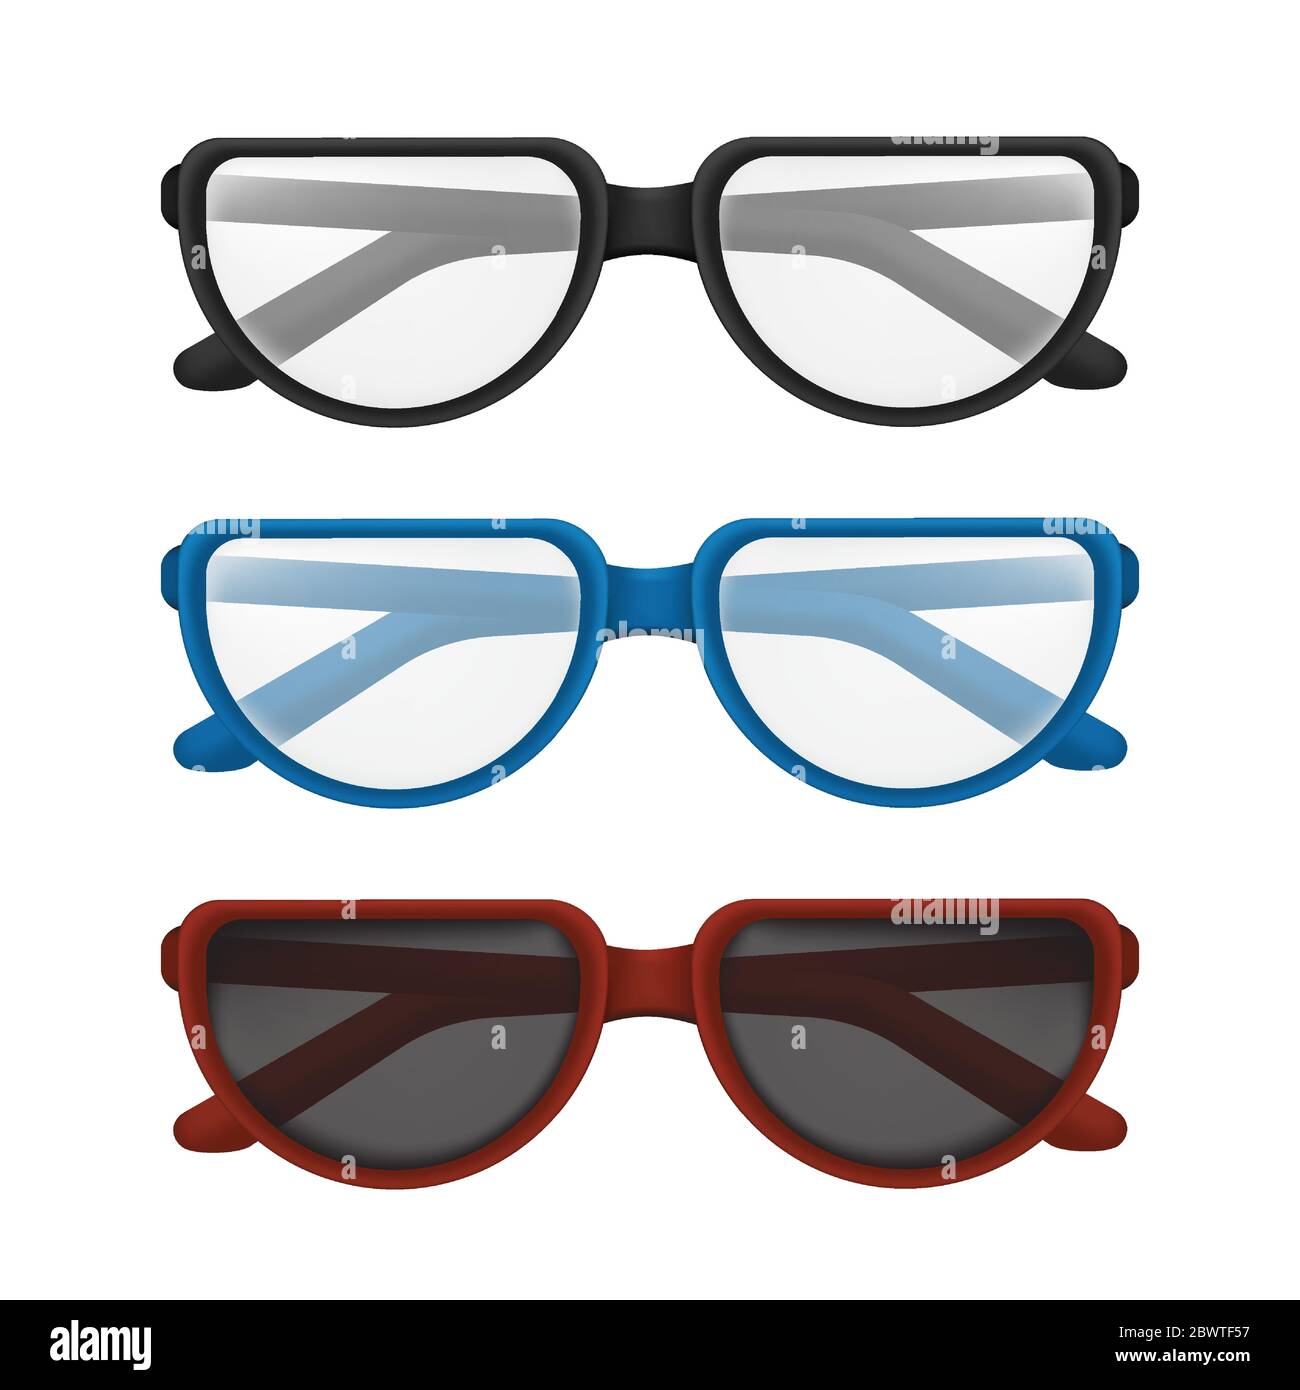 Folded glasses set with colorful frames - black, blue, red. Vector illustration of elegant classic eyewear for reading or sun protection with transpar Stock Vector